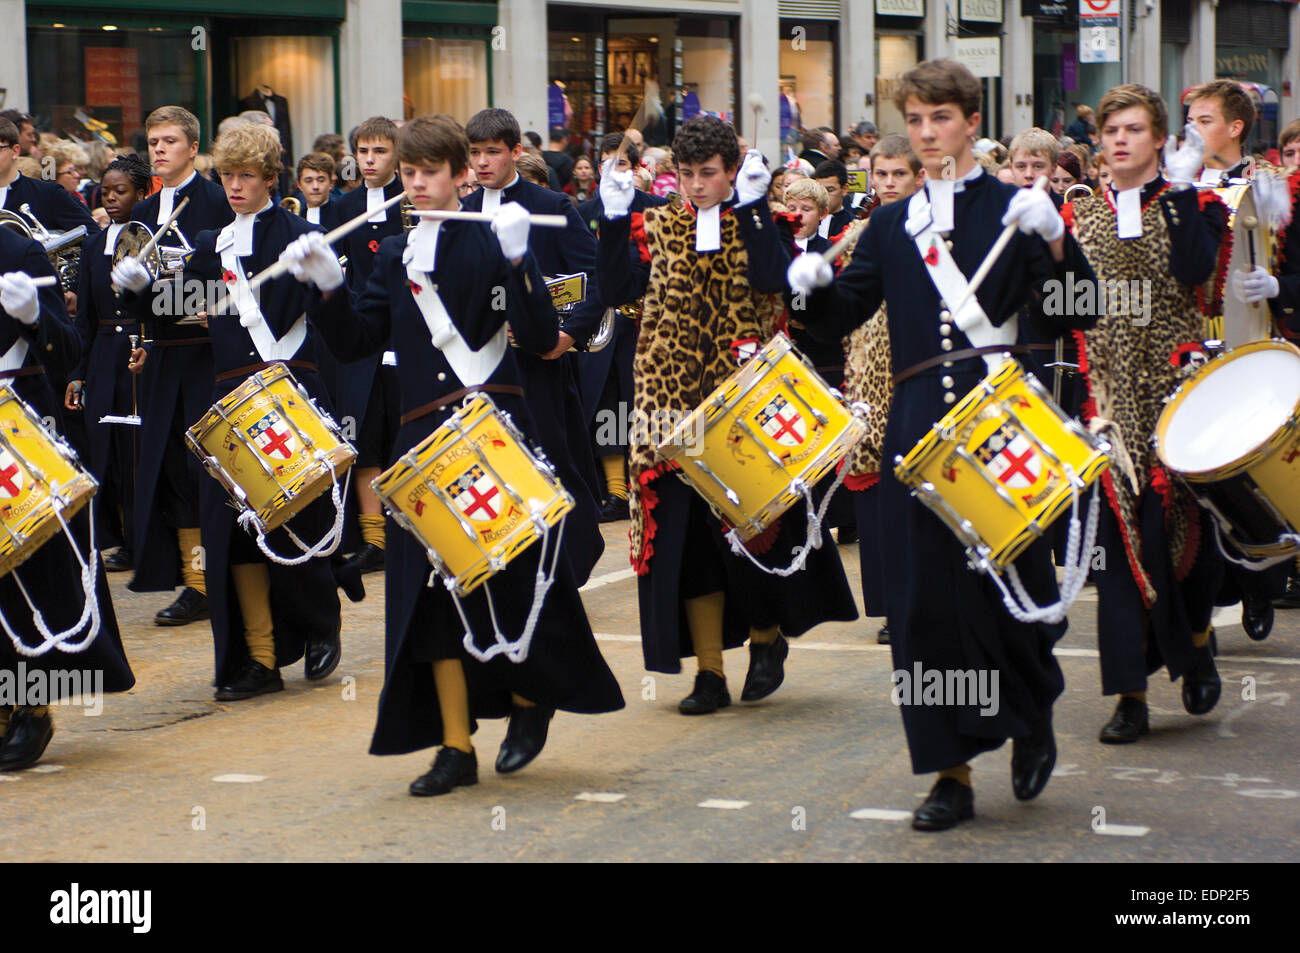 The marching band from Christ's Hospital School, which was founded in the City, parade in the Lord Mayor's Show. Stock Photo